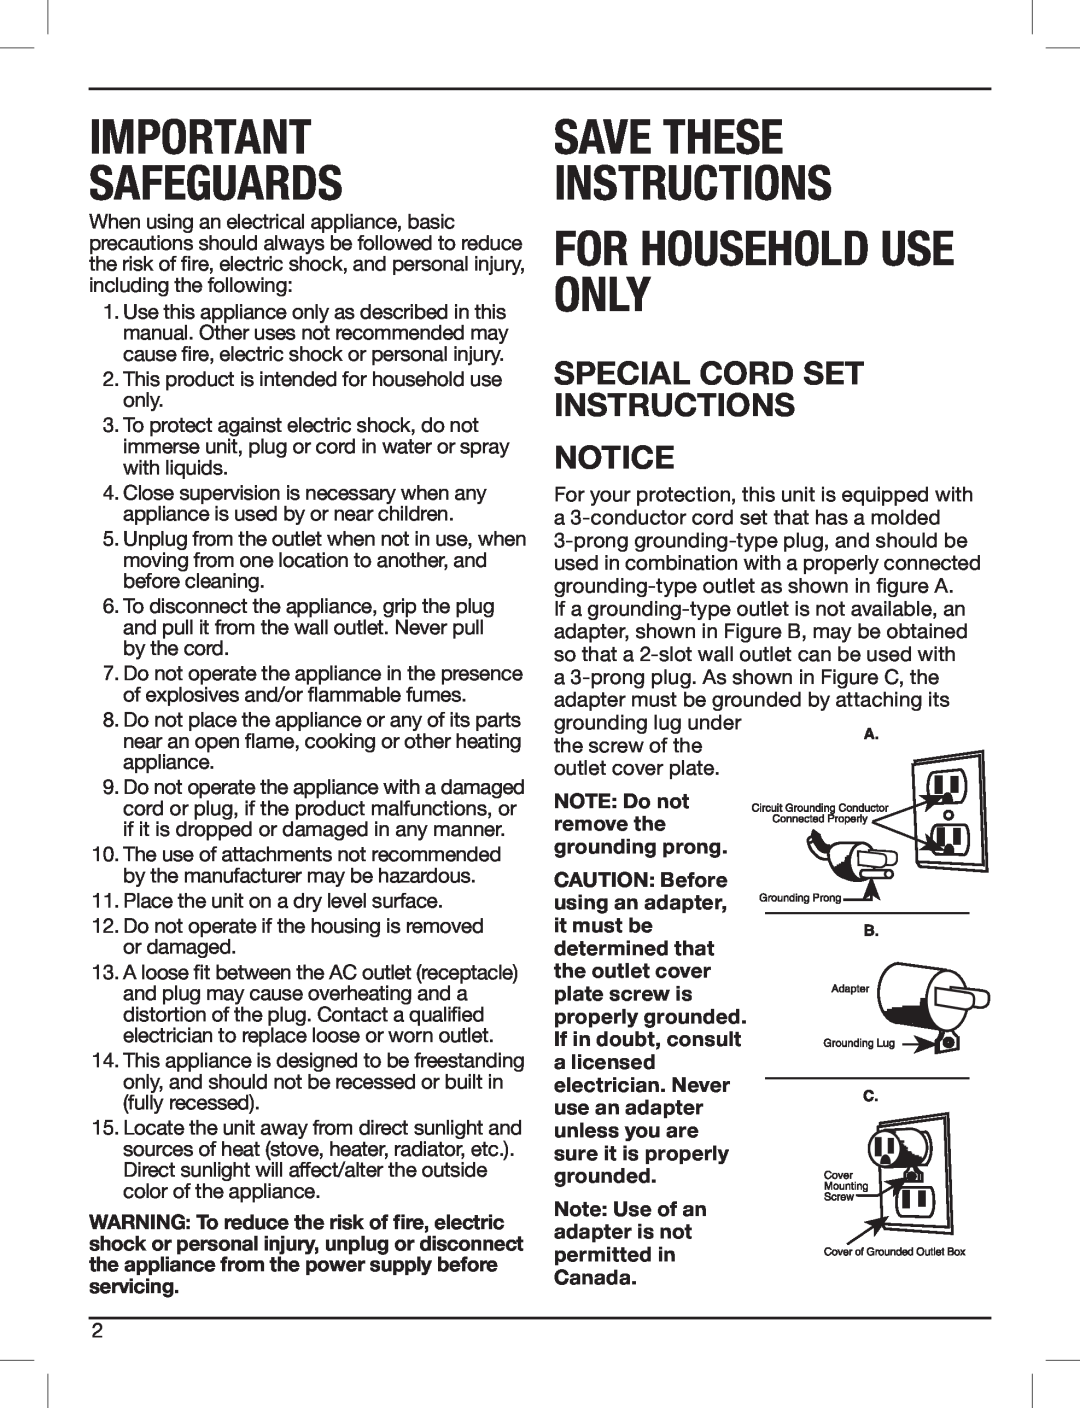 Cuisinart CWC-3200 manual Special Cord Set Instructions, Safeguards, For Household Use Only, Save These Instructions 